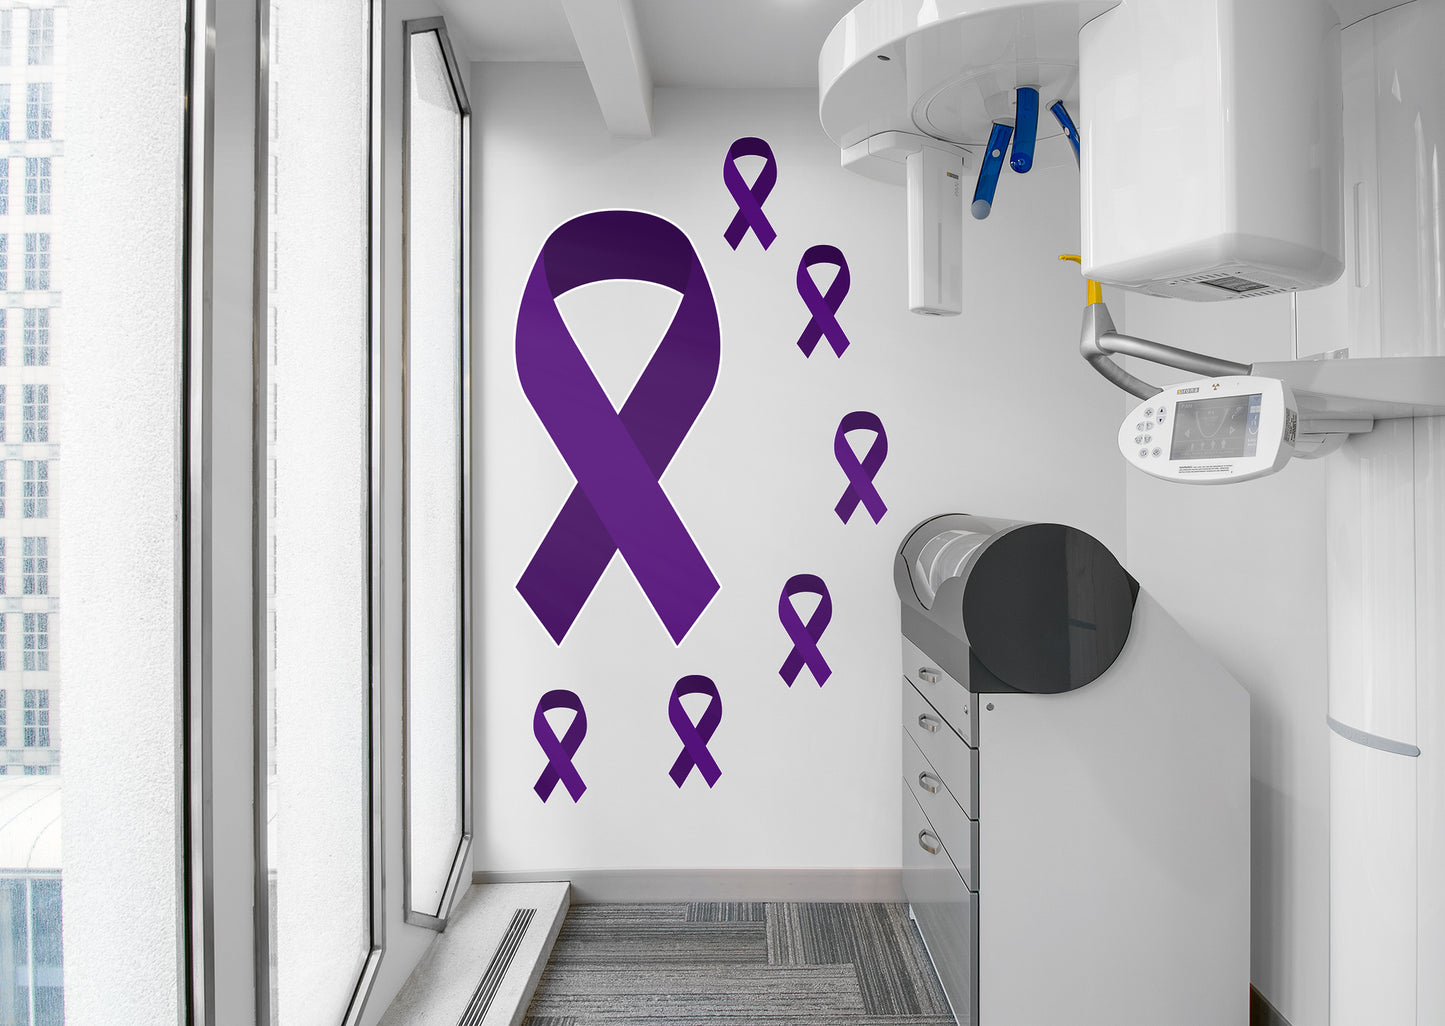 Giant Pancreatic Cancer Ribbon  + 6 Decals (24"W x 51"H)